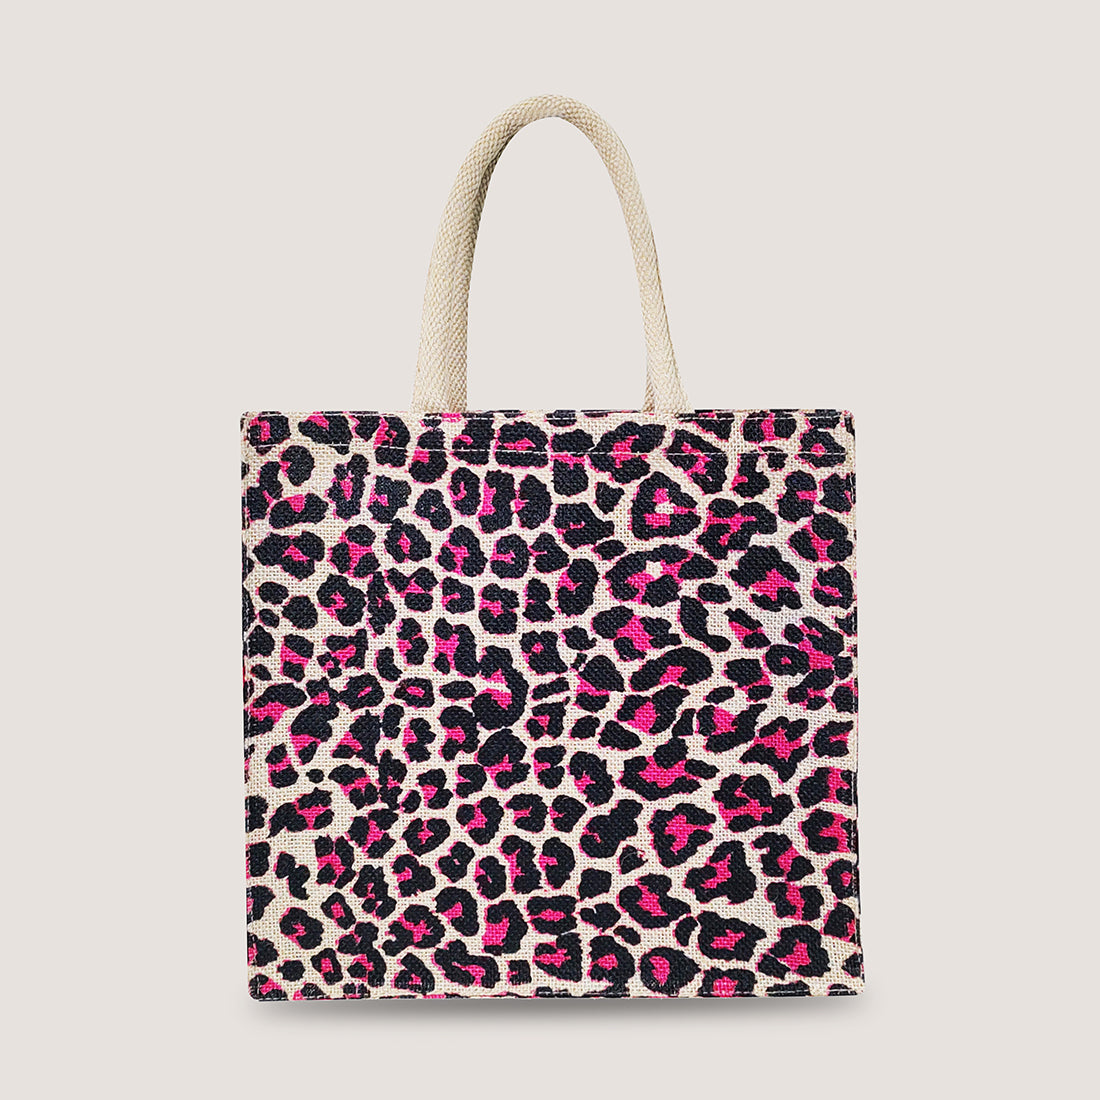 EARTHBAGS LEOPARD PRINTED LUNCH BAGS WITH PADDED HANDLES